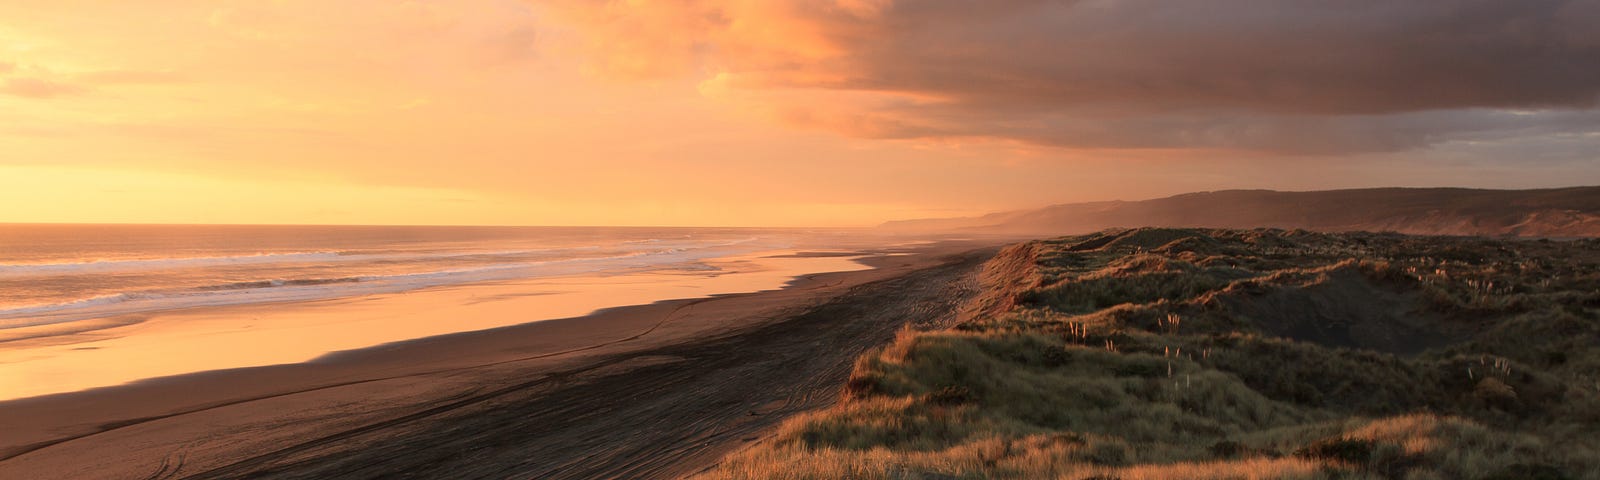 sunset by the seaside. the light is tangerine and grey. on the left is the ocean, gentle lapping waves. a narrow stretch of dark beach follows to the right, and the, a stretch of beachgrass, light orange and black in the shadows.